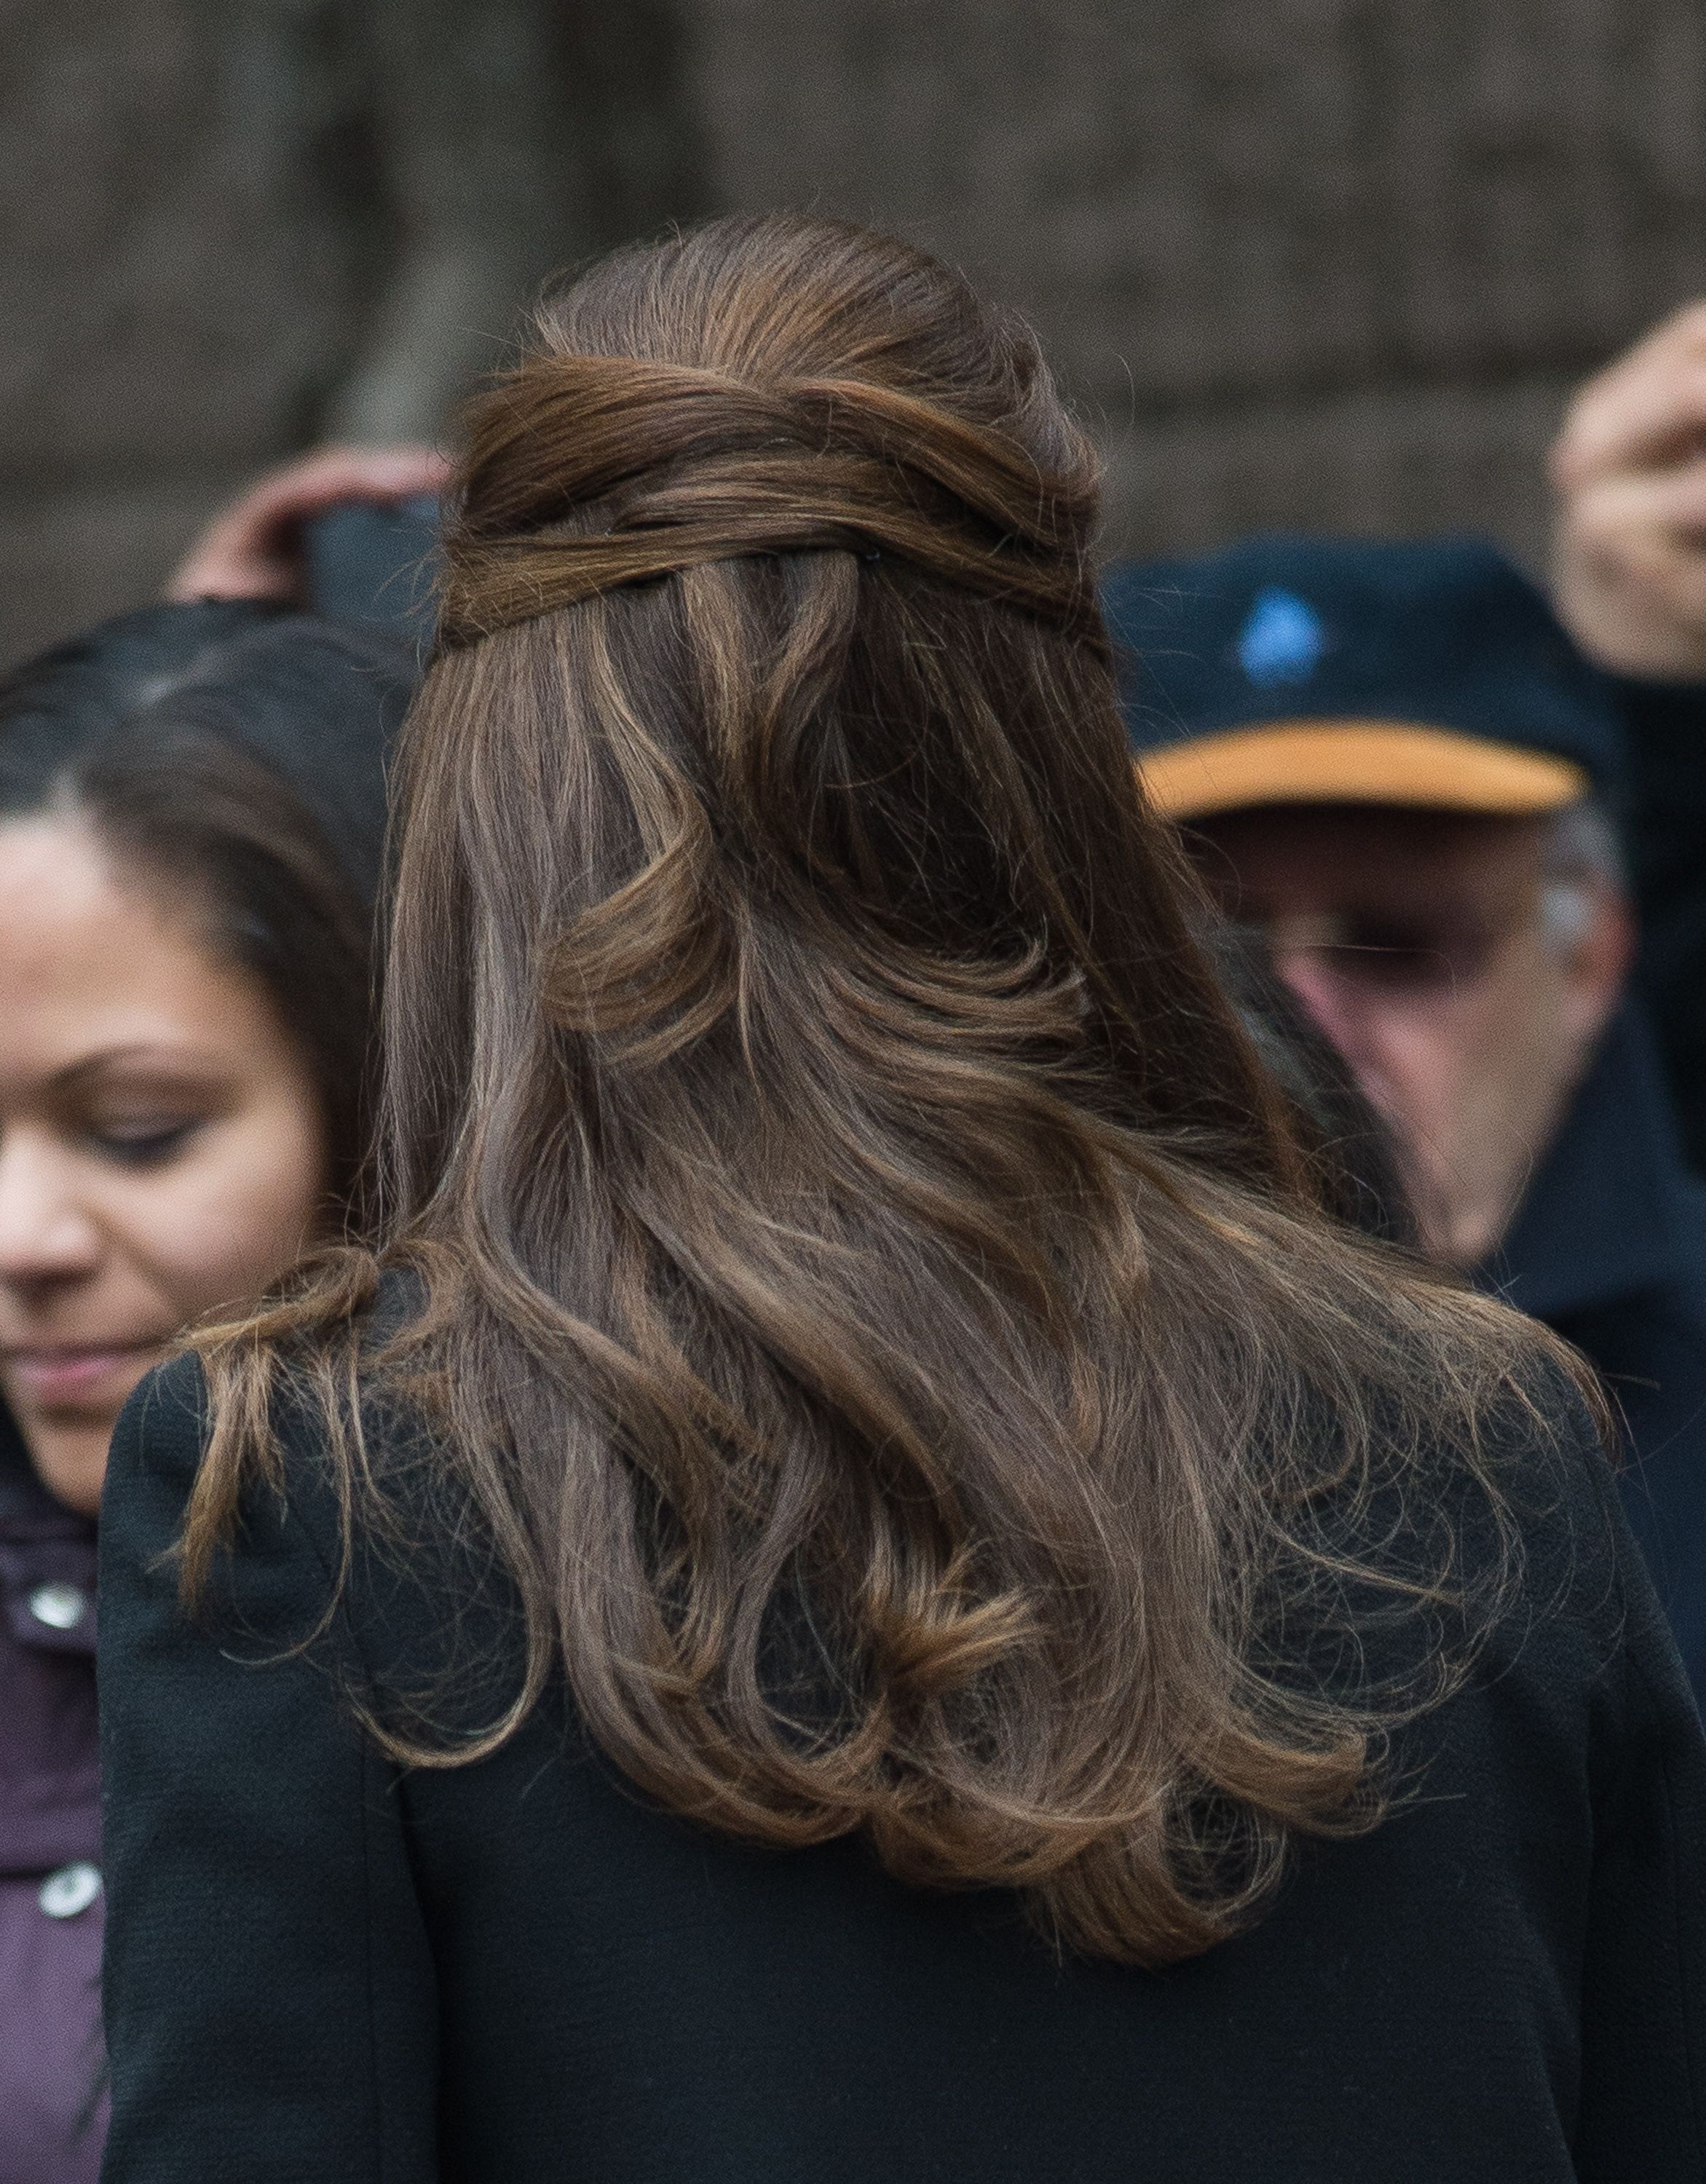 How To Get Kate Middleton's Hair - Blowout, Styling Tips